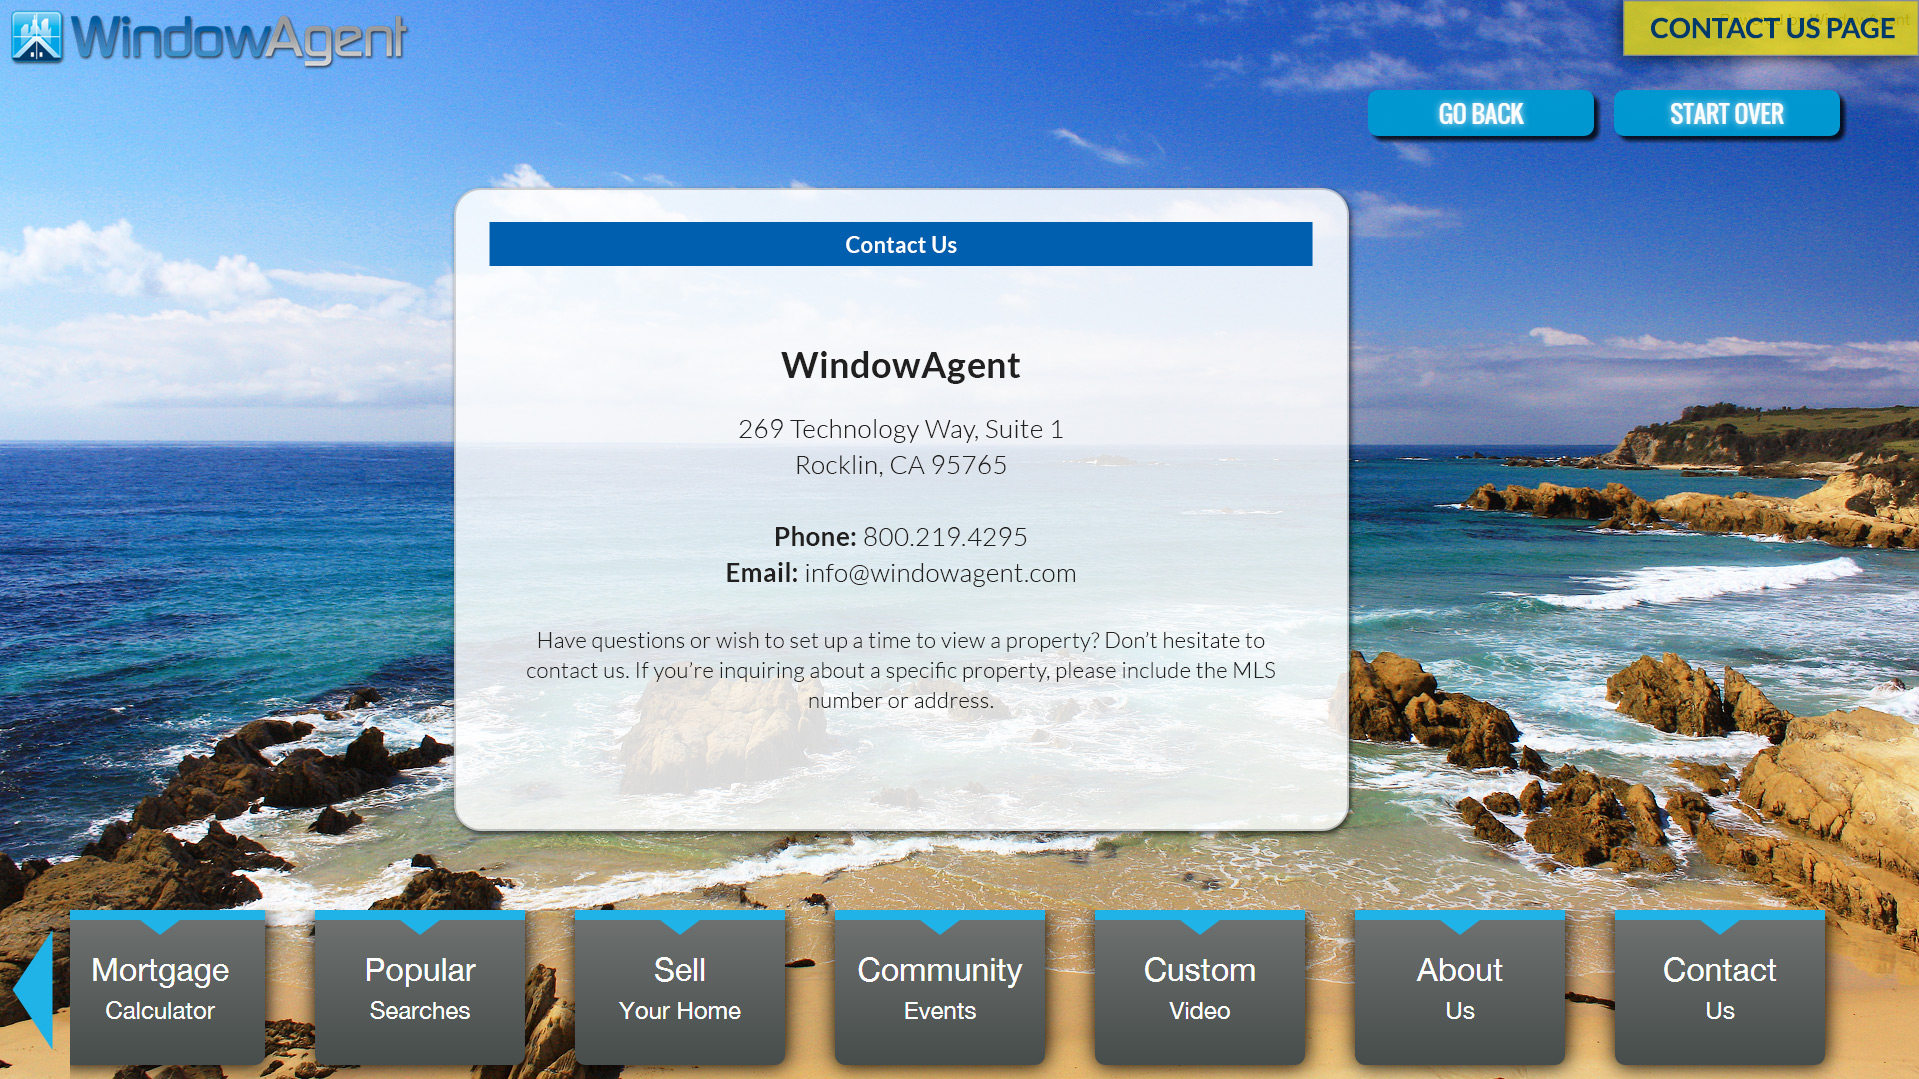 Windowagent software app customizeable contact our realty page